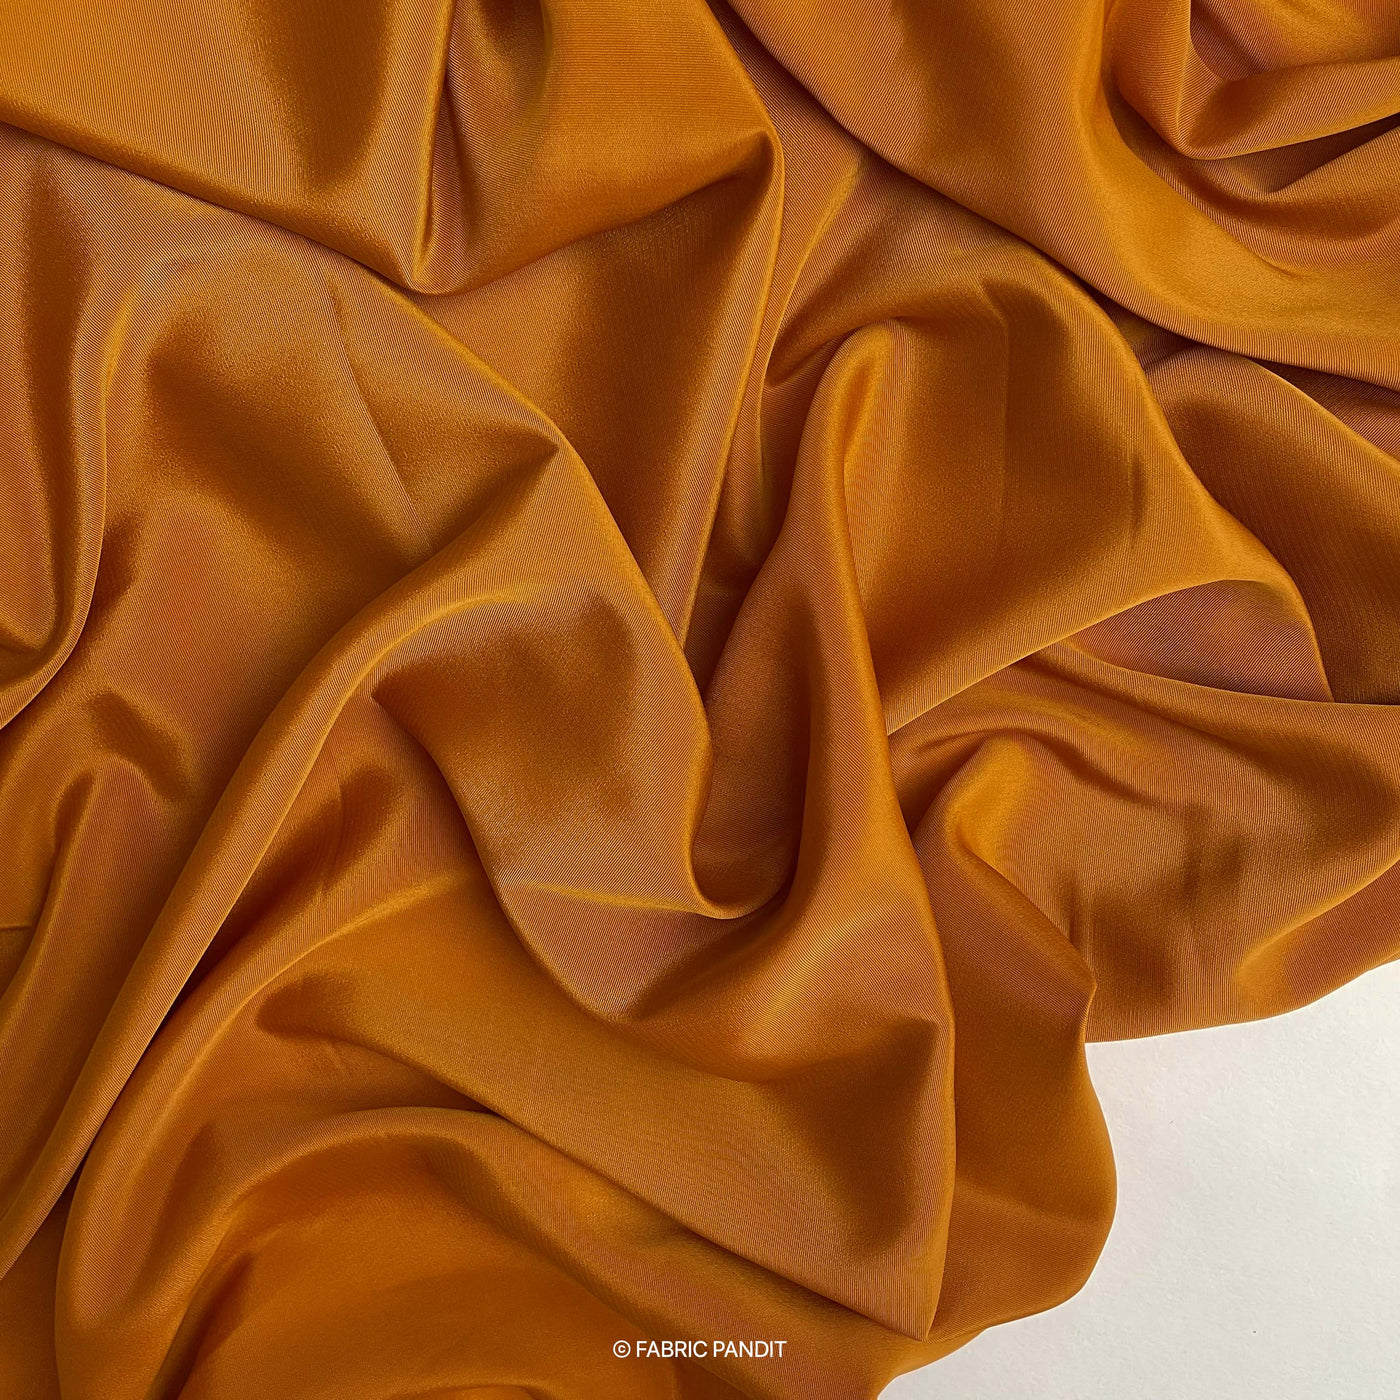 Fabric Pandit Cut Piece (CUT PIECE) Caramel Brown Premium French Crepe Fabric (Width 44 inches)